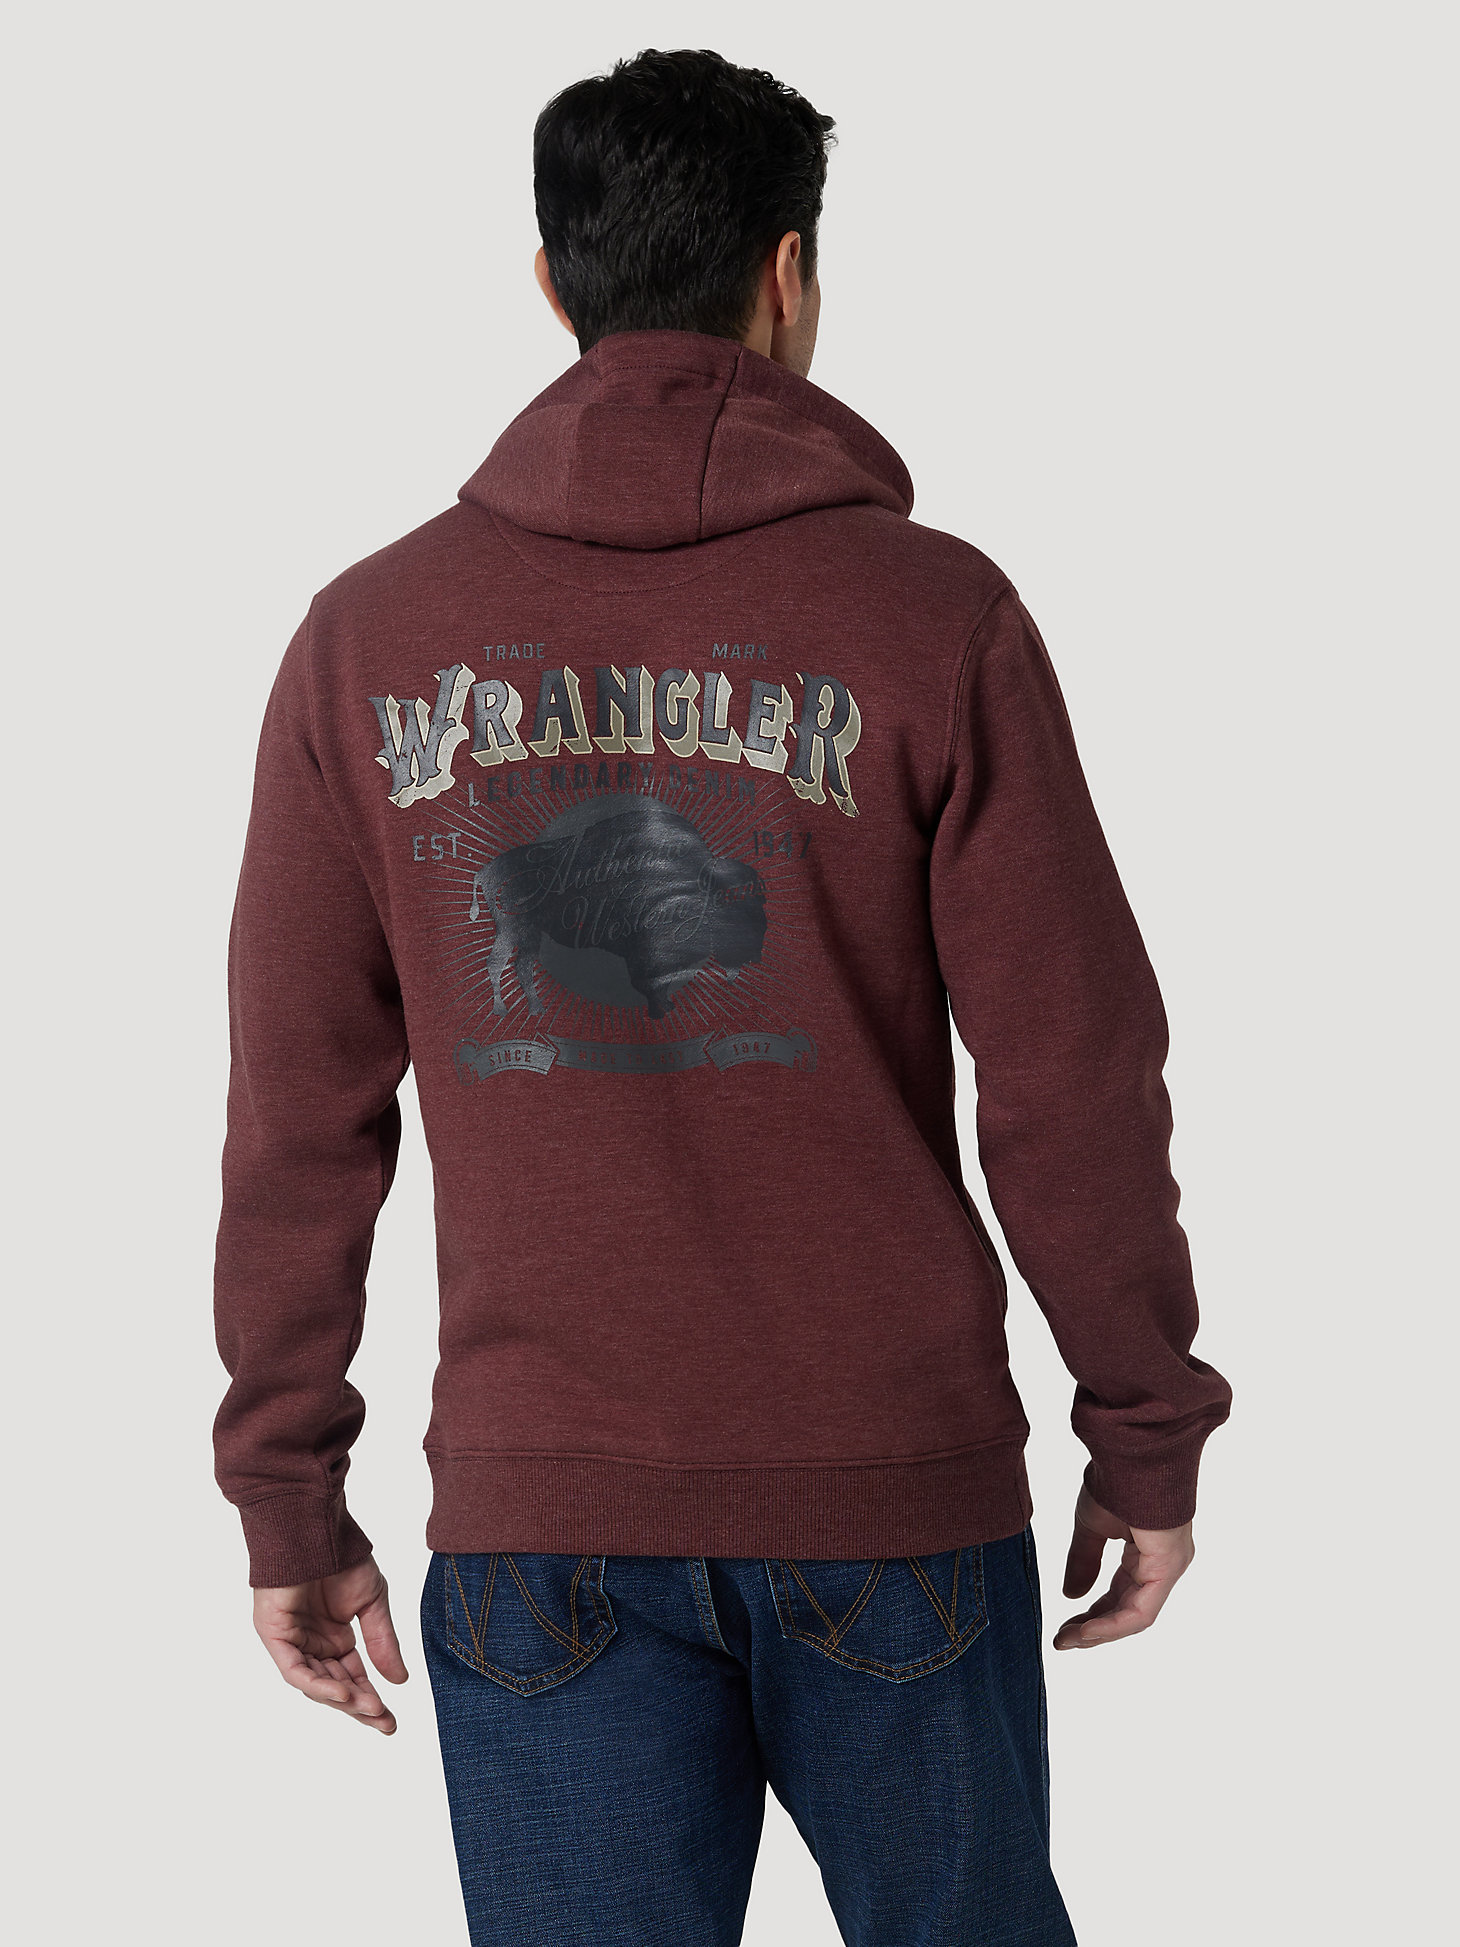 Men's Long Sleeve Authentic Western Buffalo Pullover Hoodie in Burgundy Heather alternative view 1